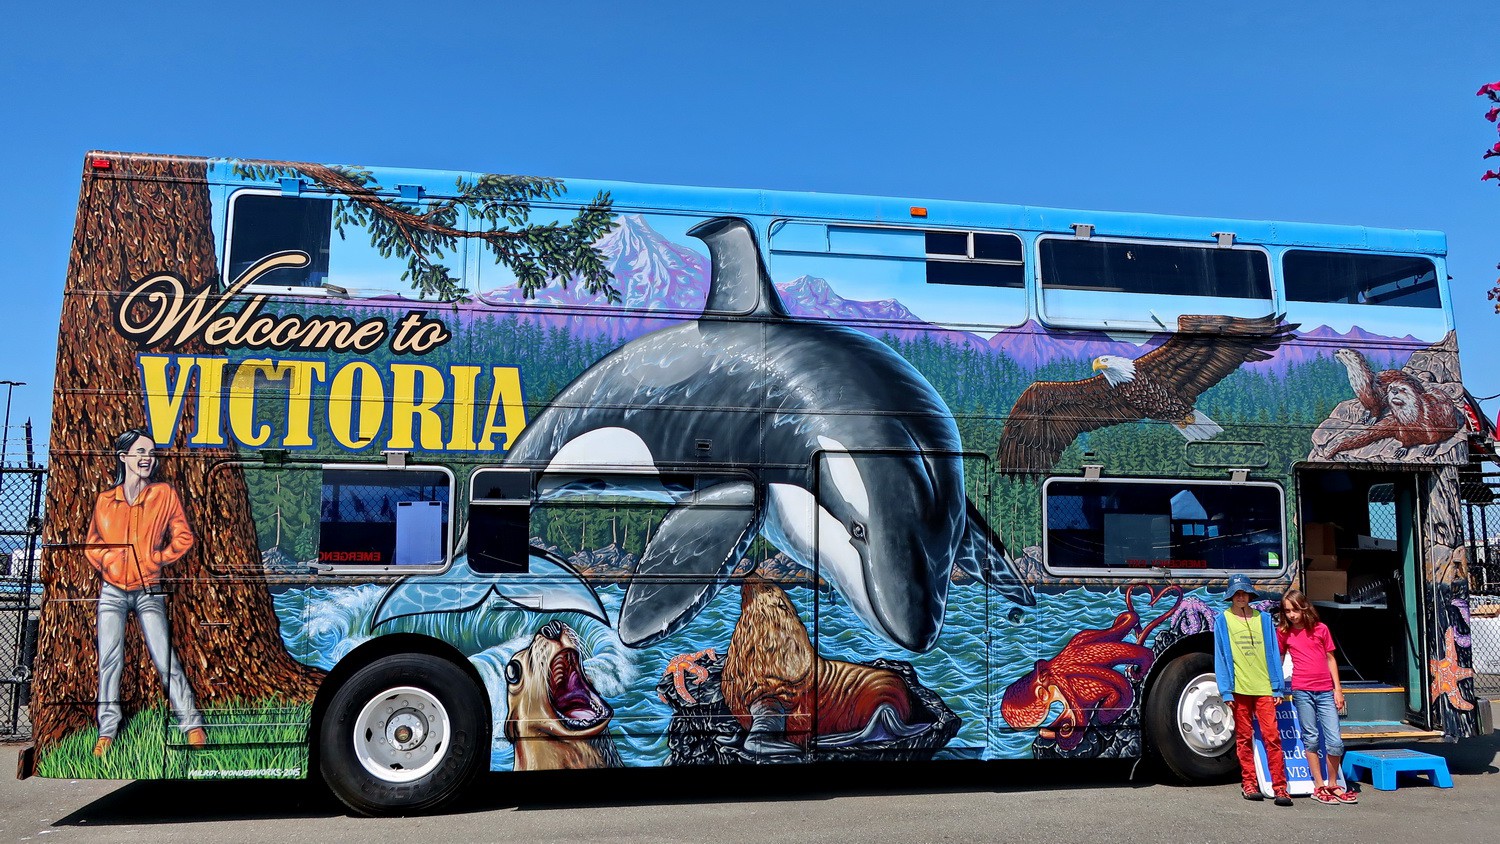 Welcome bus of Victoria